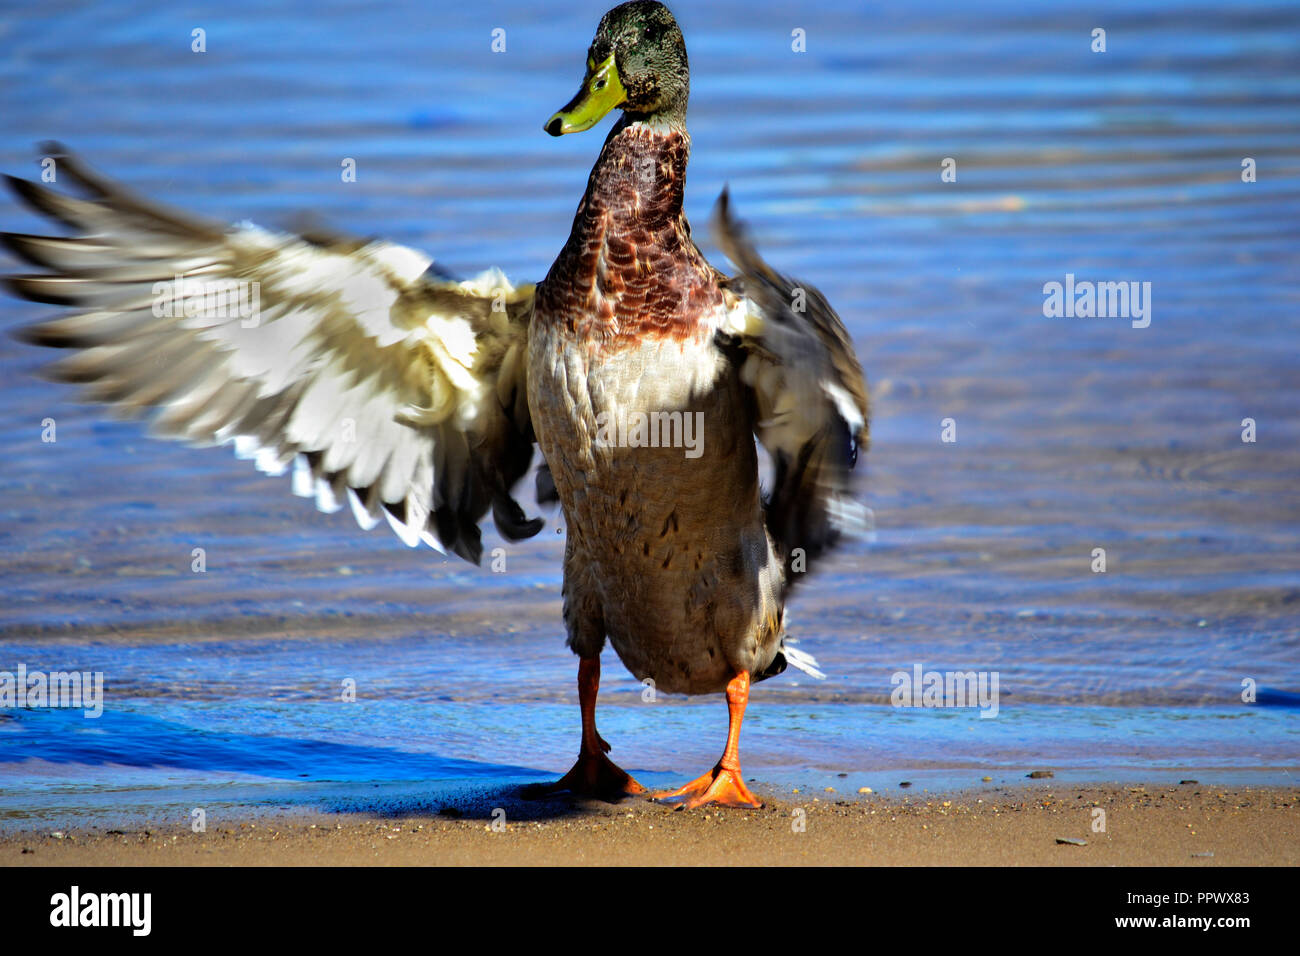 This is a photo of a duck drying its wings taken on the shore of Lake Leelanau in Michigan Stock Photo